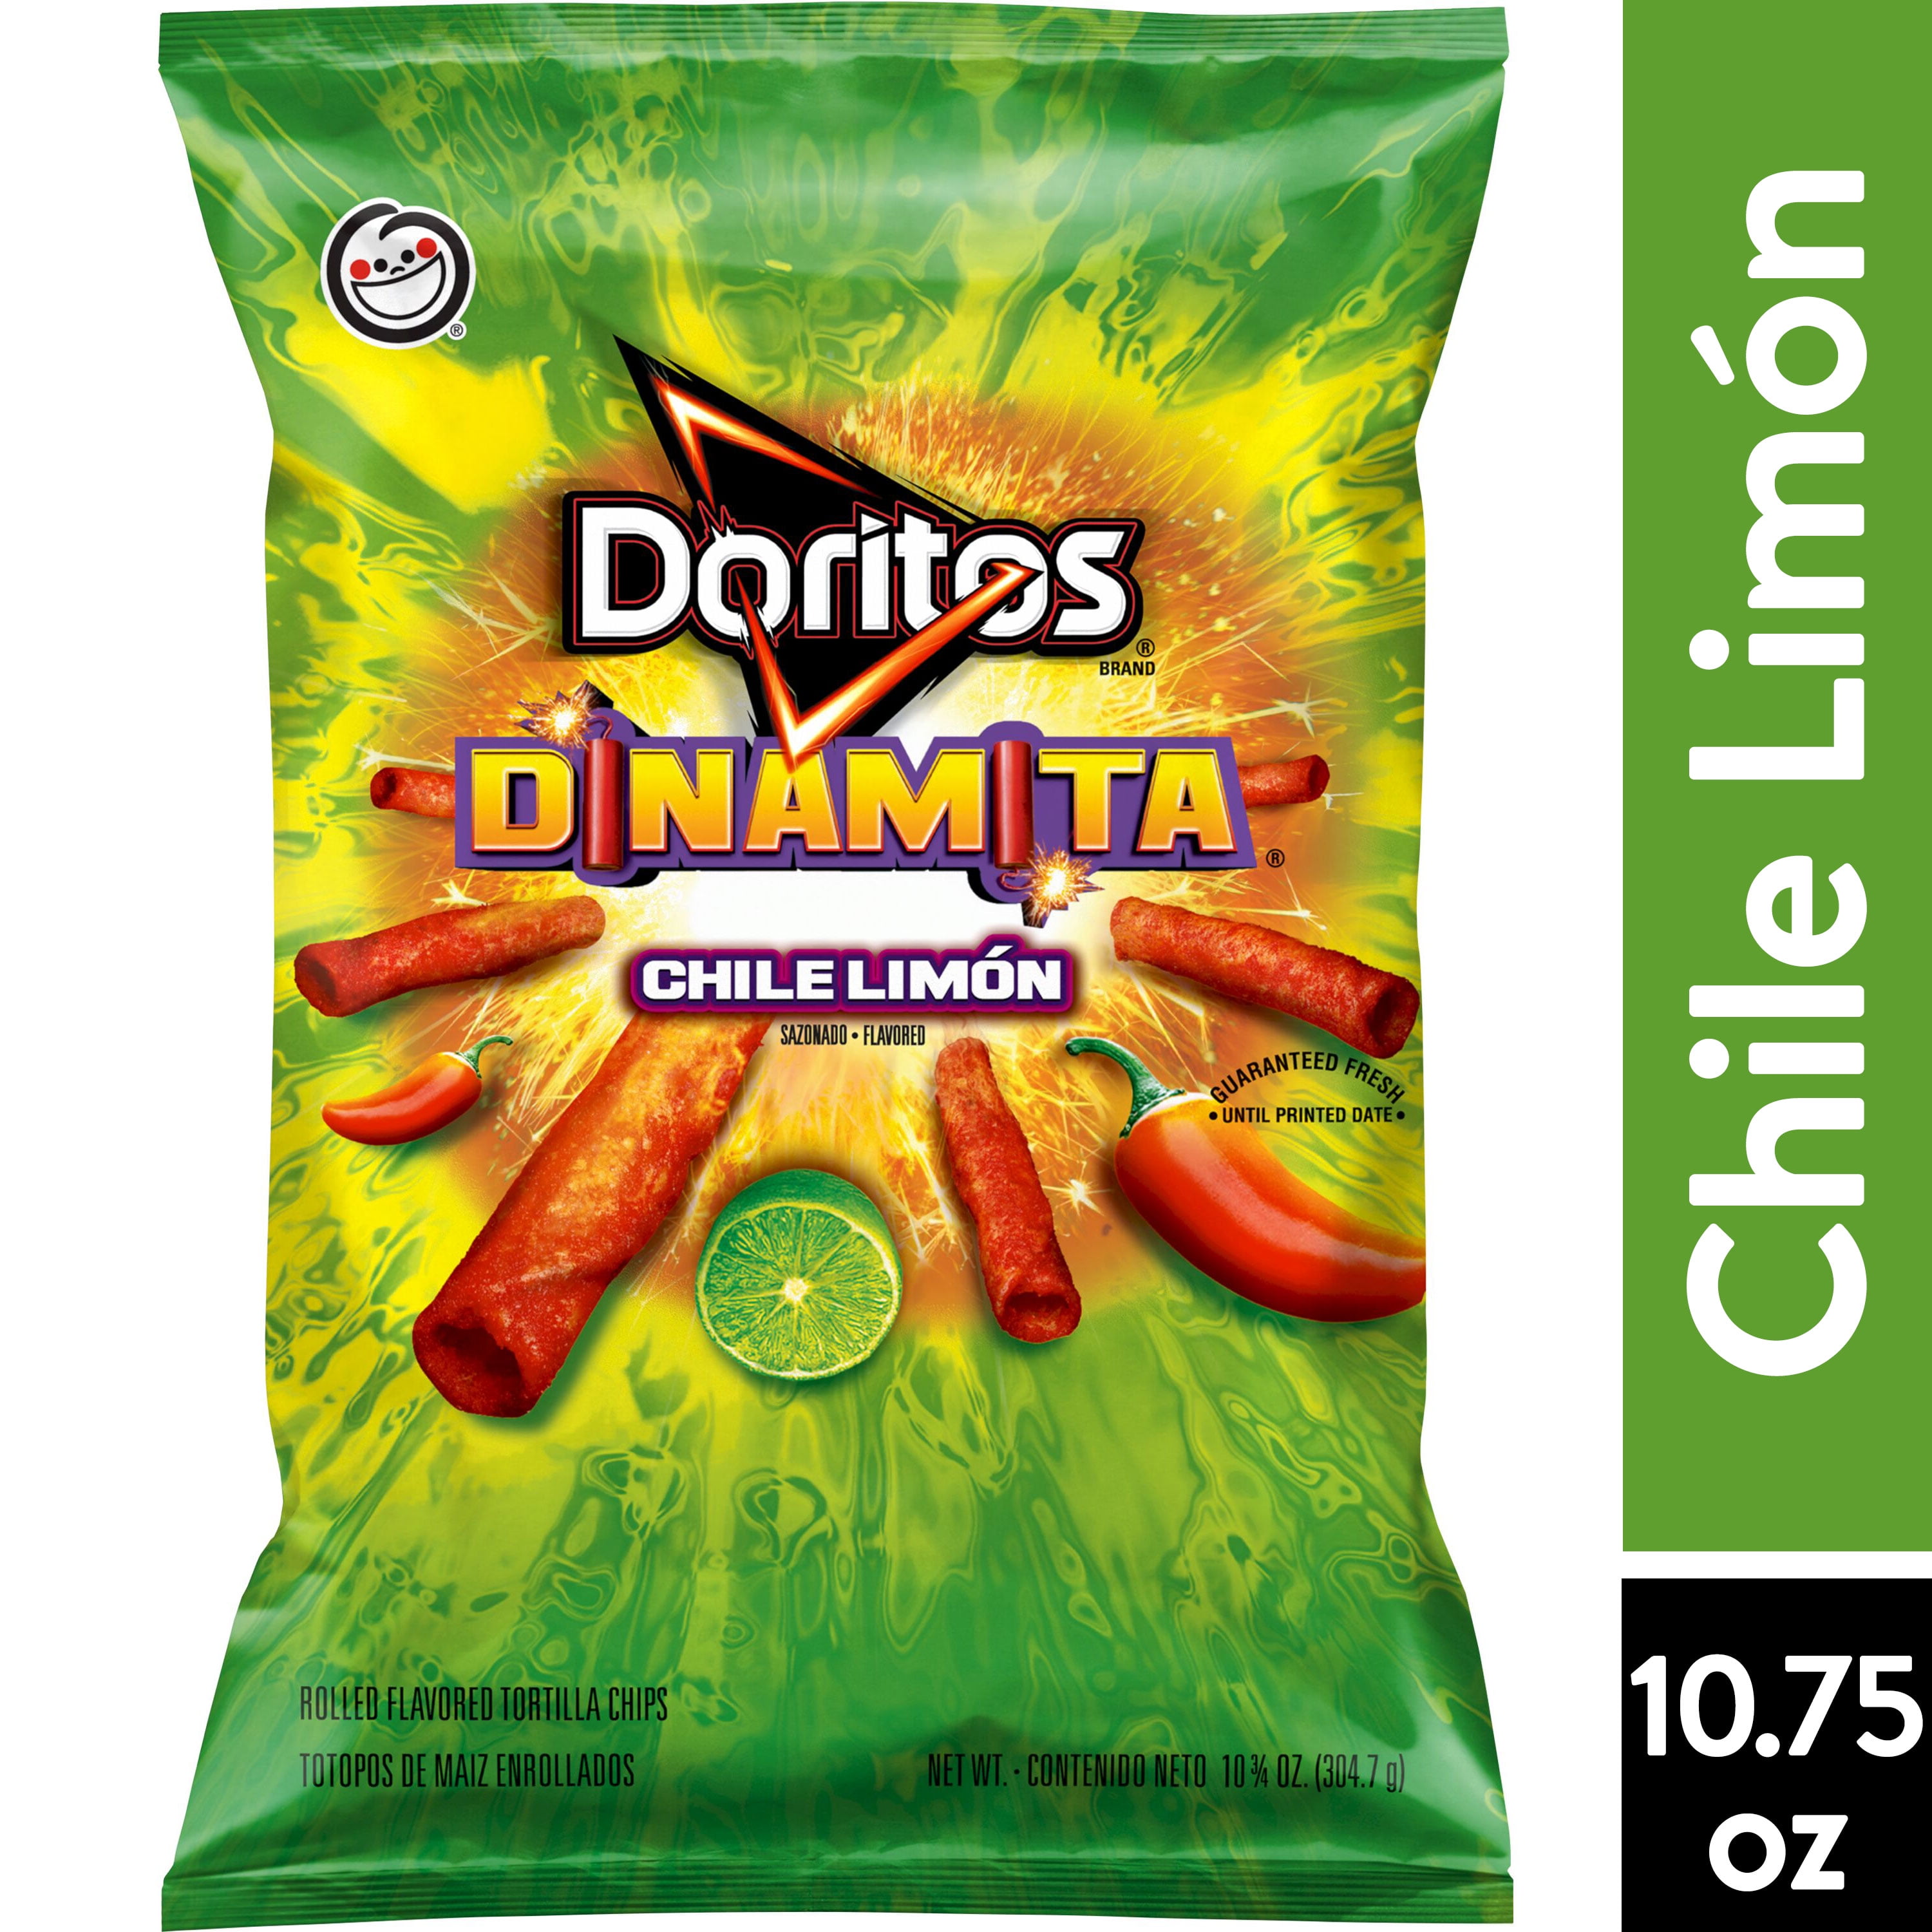 SALE／78%OFF】 ドリトス ルーレットホット トルティーヤチップス Walkers Doritos Roulette Hot Tortilla  Chips 180g 通販